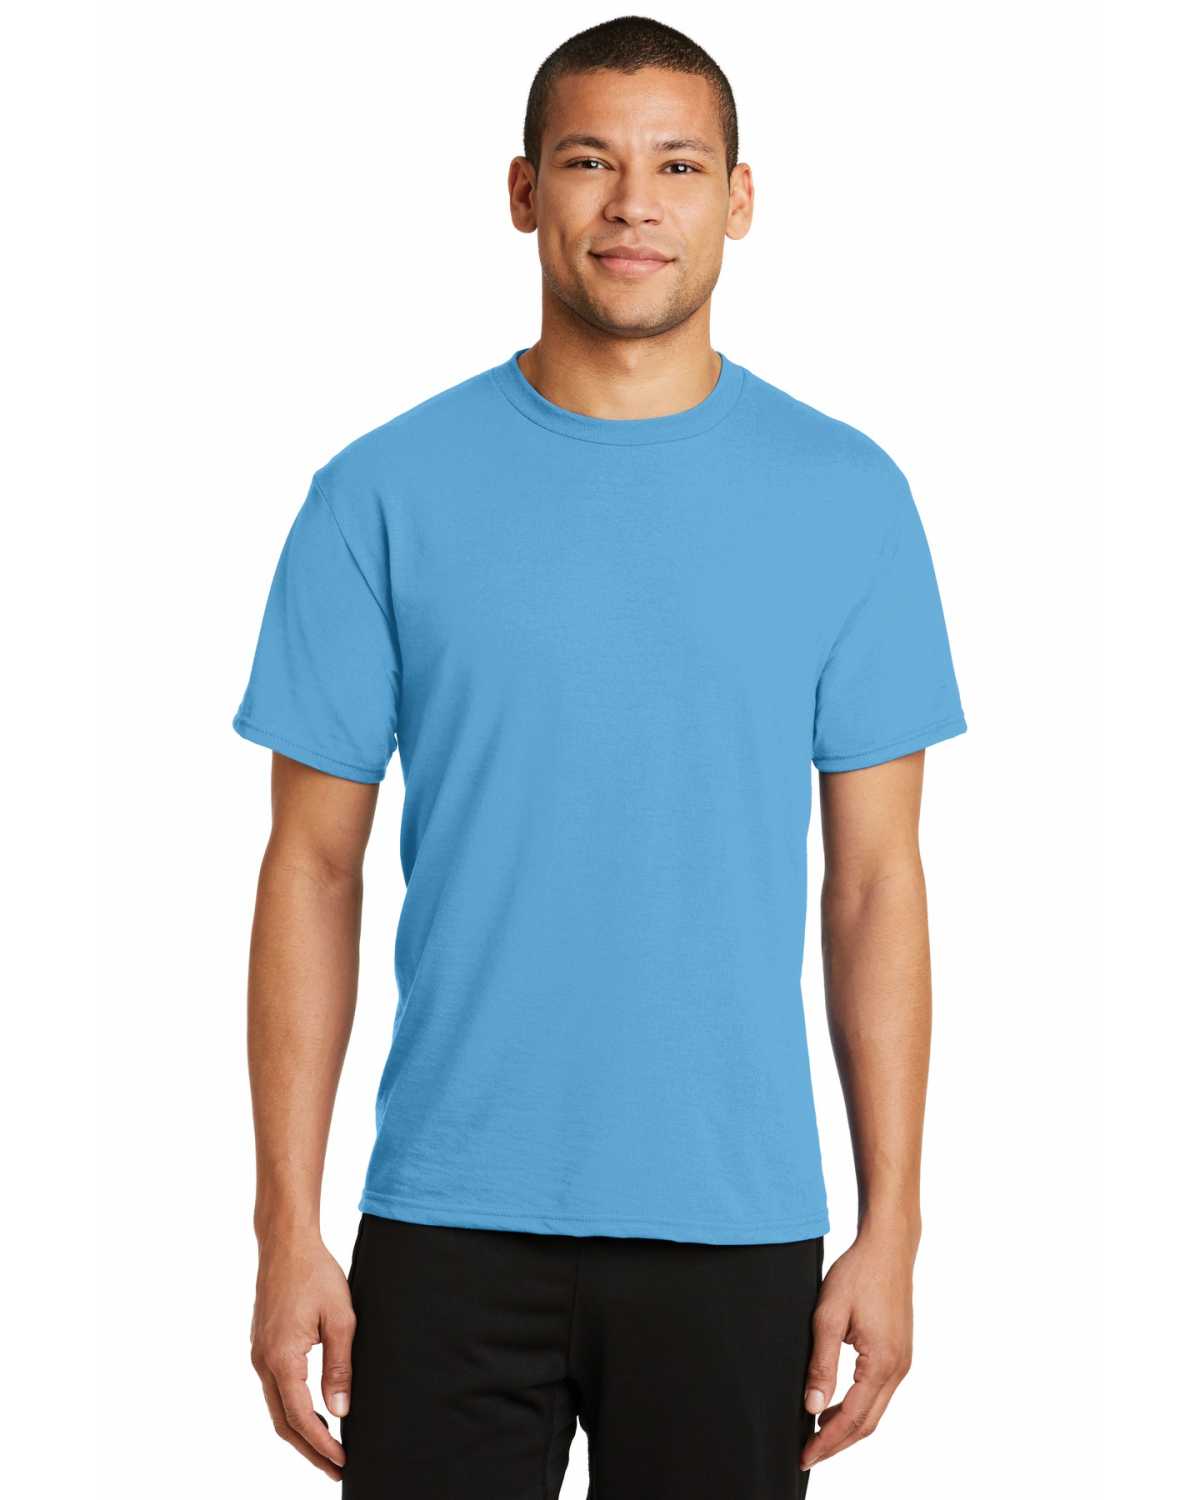 Port & Company PC381 Performance Blend Tee on discount | ApparelChoice.com